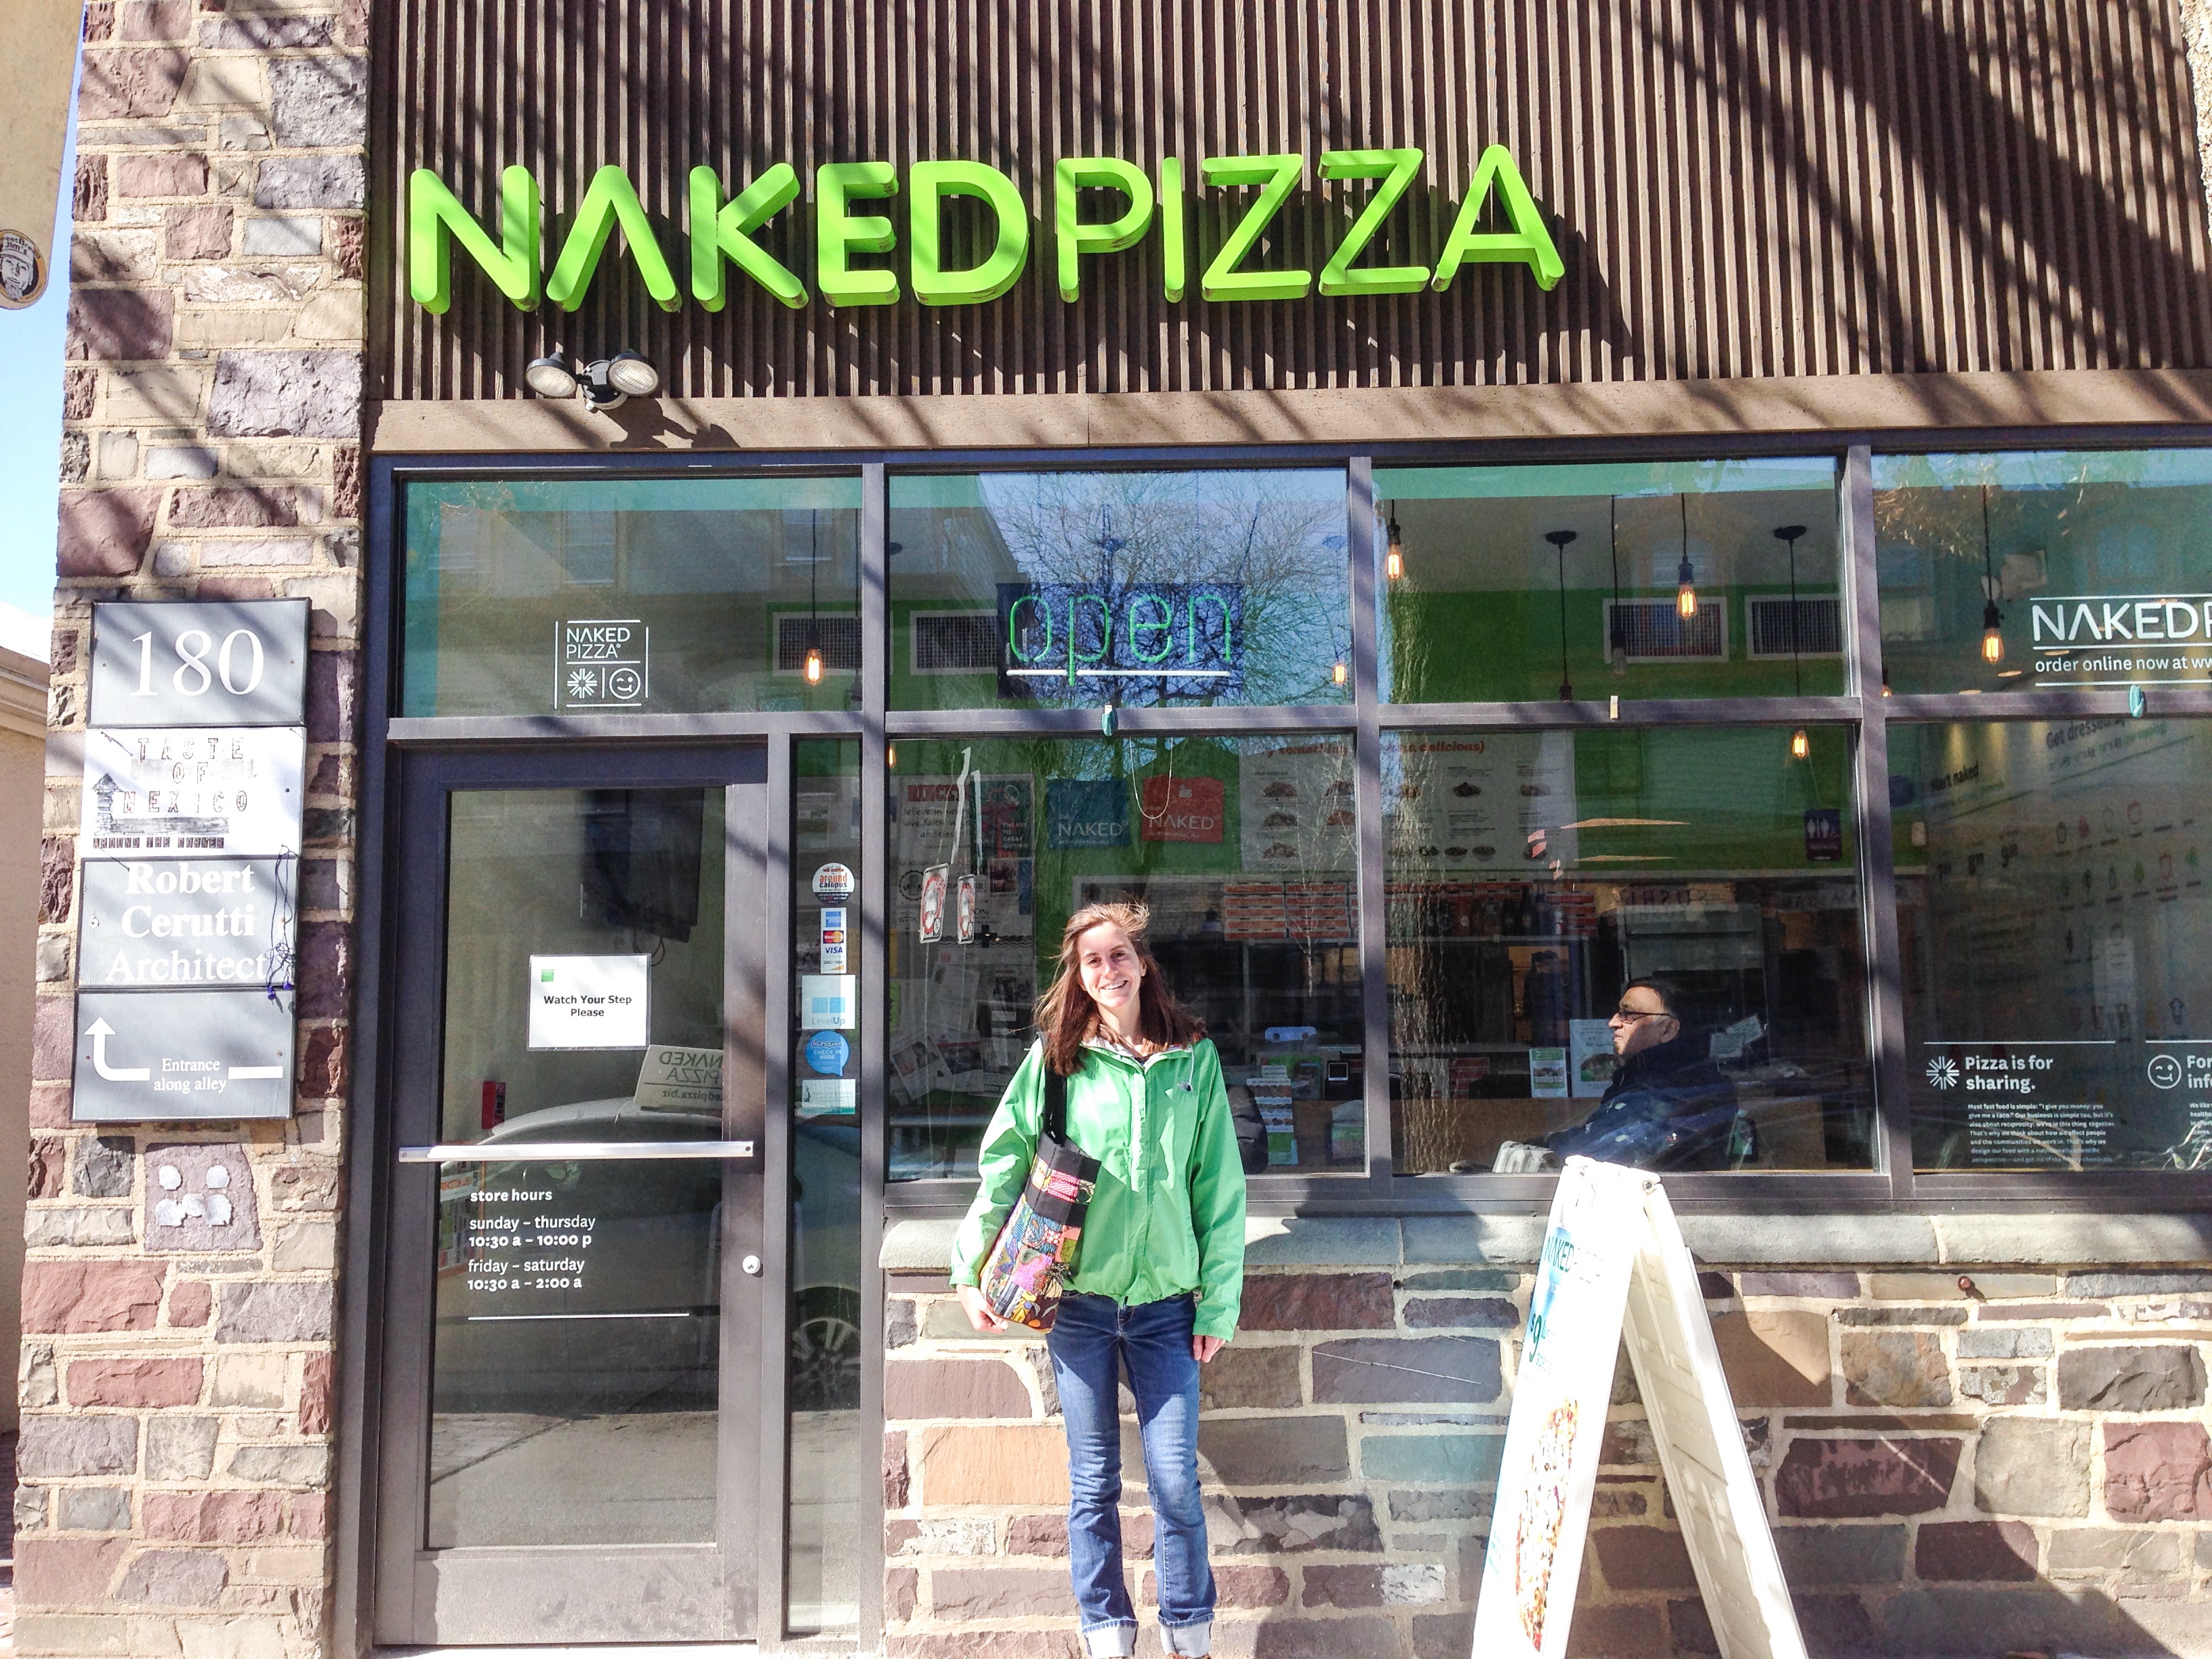 This is a picture of me outside of Naked Pizza.